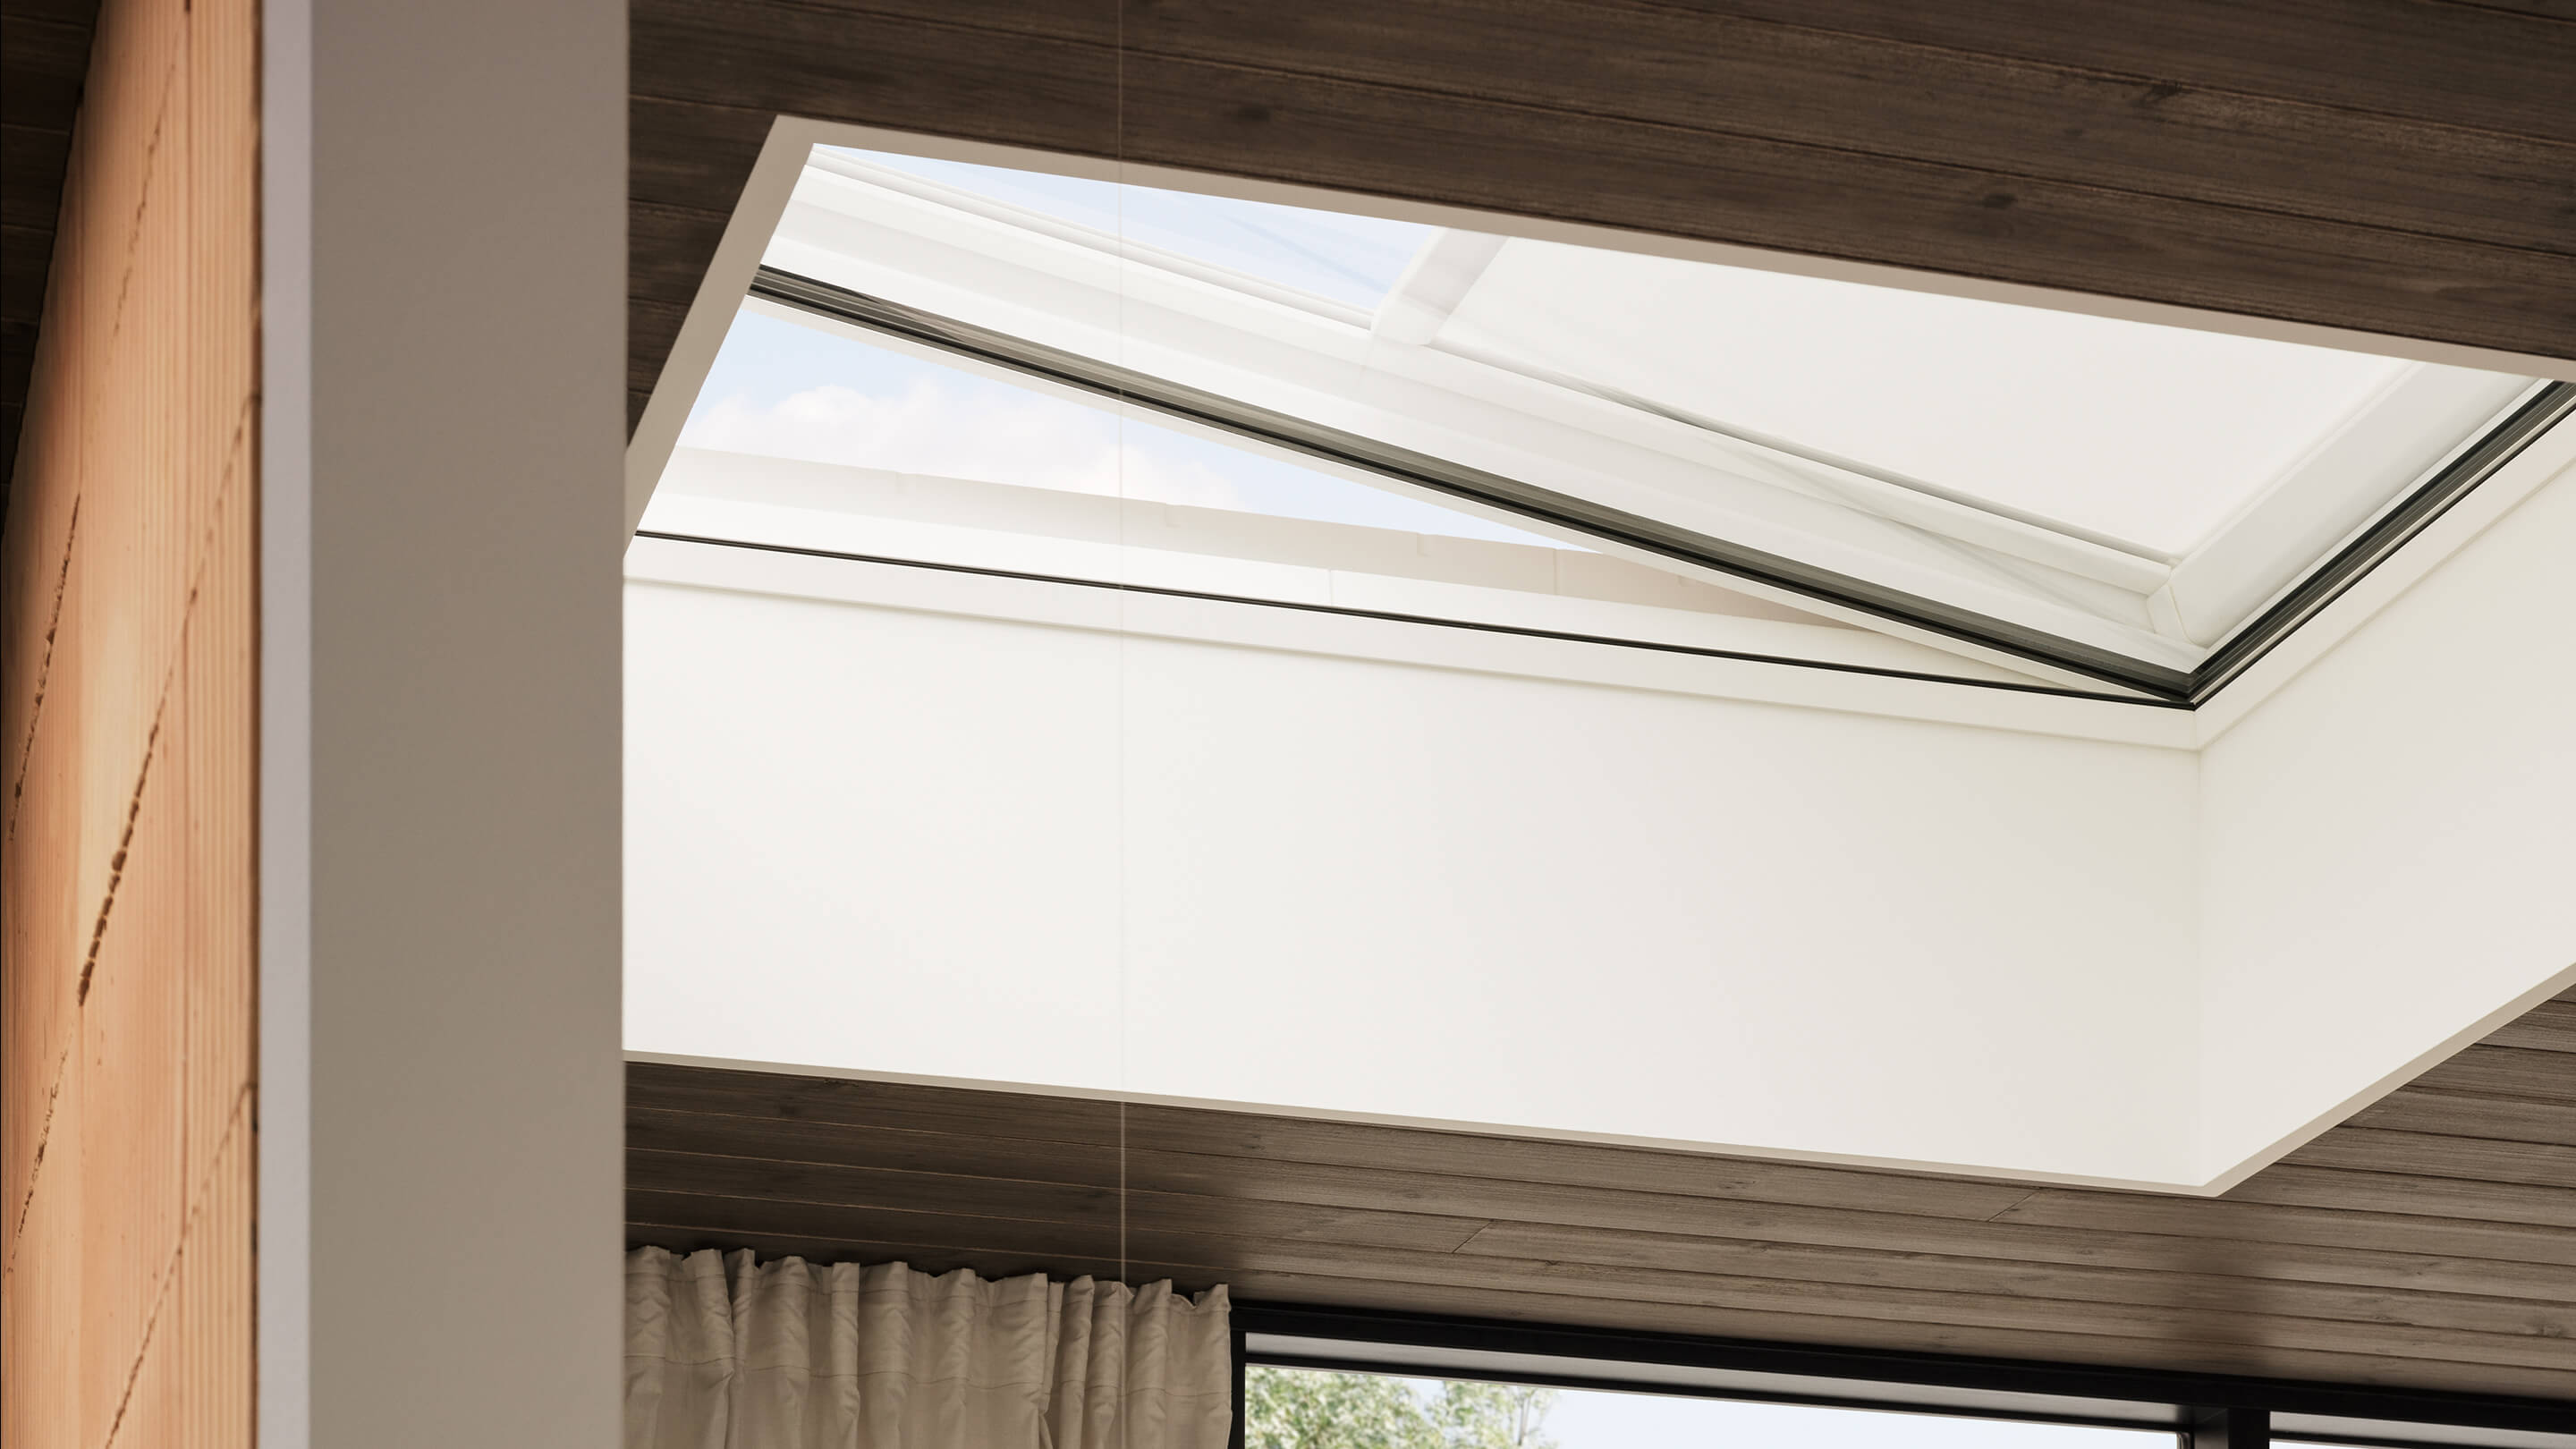 VELUX anti-heat awning blind for flat roof windows installed in a VELUX flat roof window seen from the inside